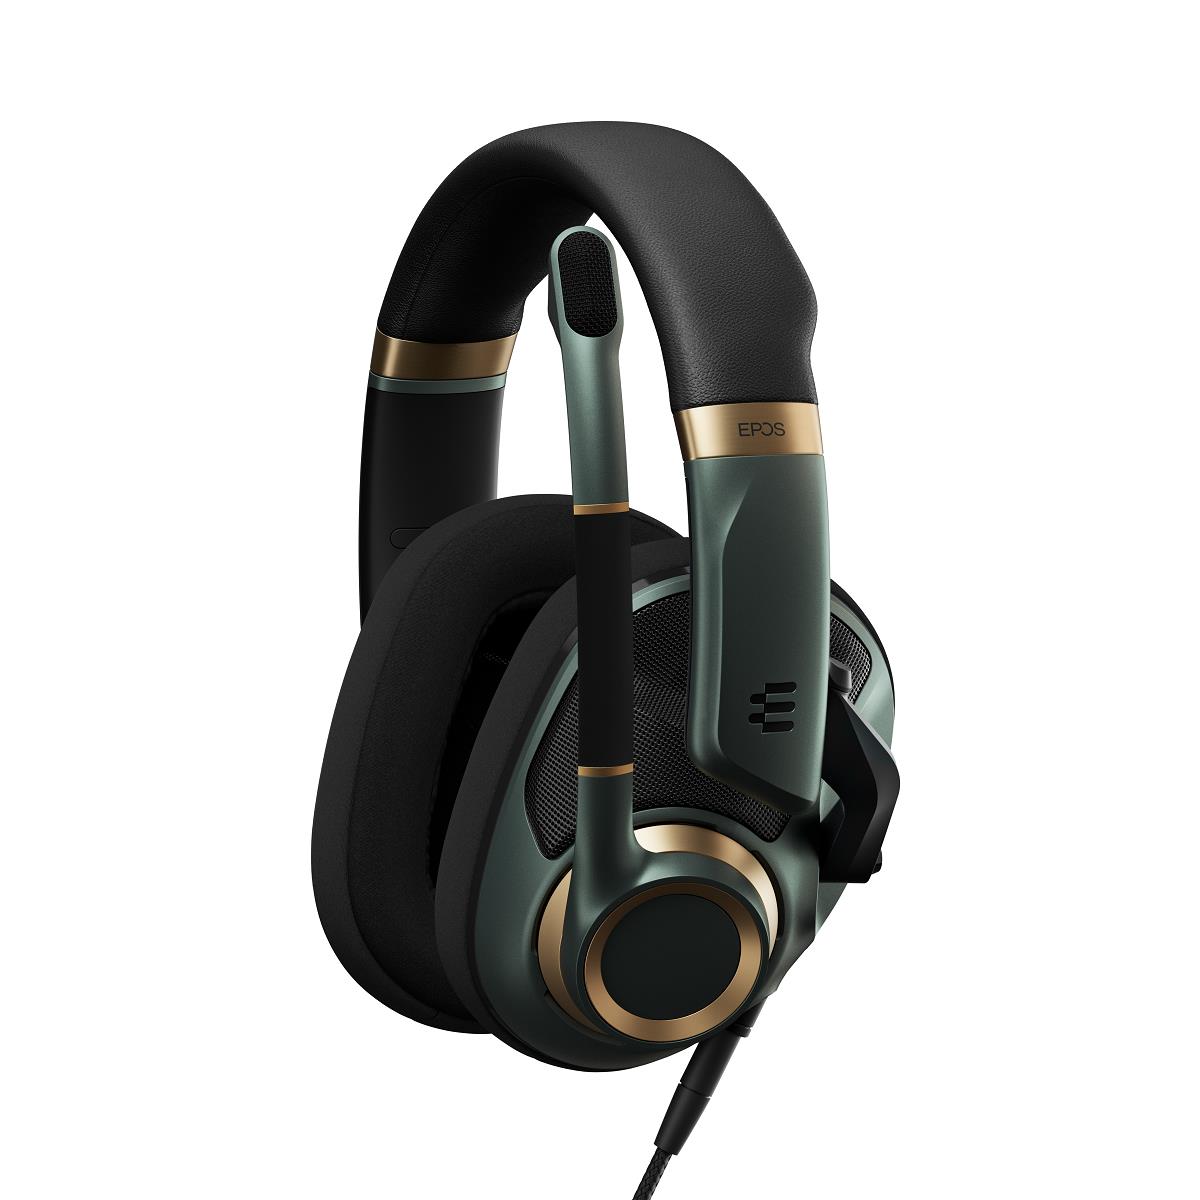 EPOS Audio H6PRO Open Acoustic Gaming Headset (Racing Green) - image 2 of 8